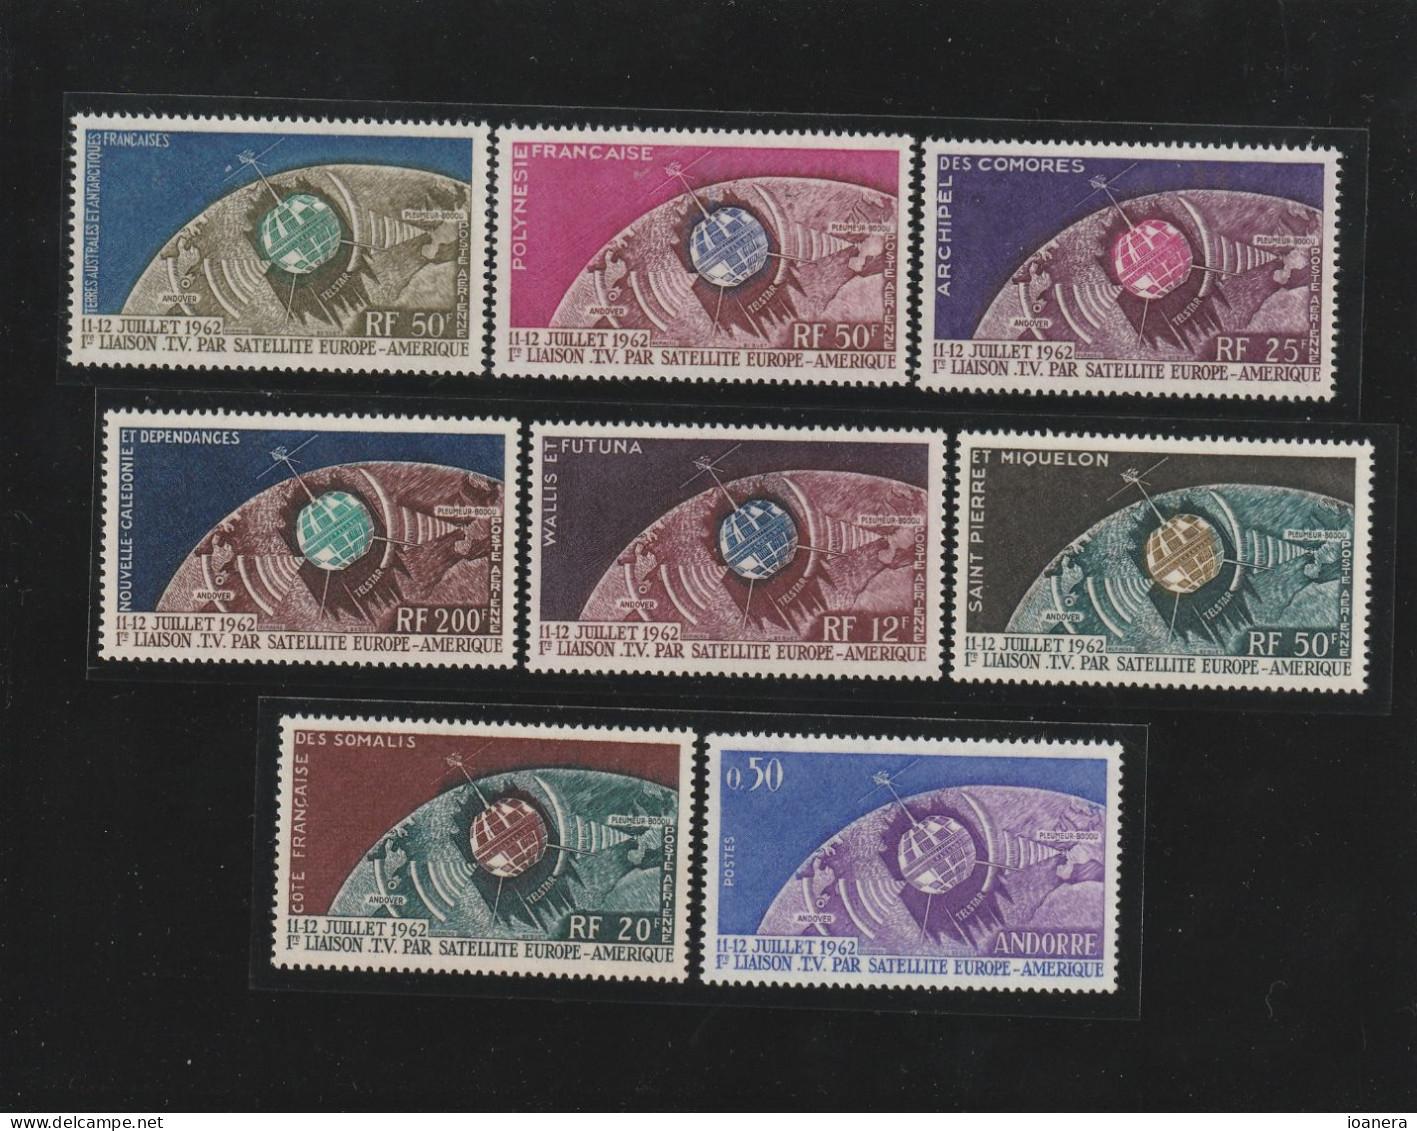 Taaf 1962-1963 - First TV Remote America-Europe, Omnibuse , Perforated , MNH , MI.27,23,51,386,201,397,349,178 - Unused Stamps